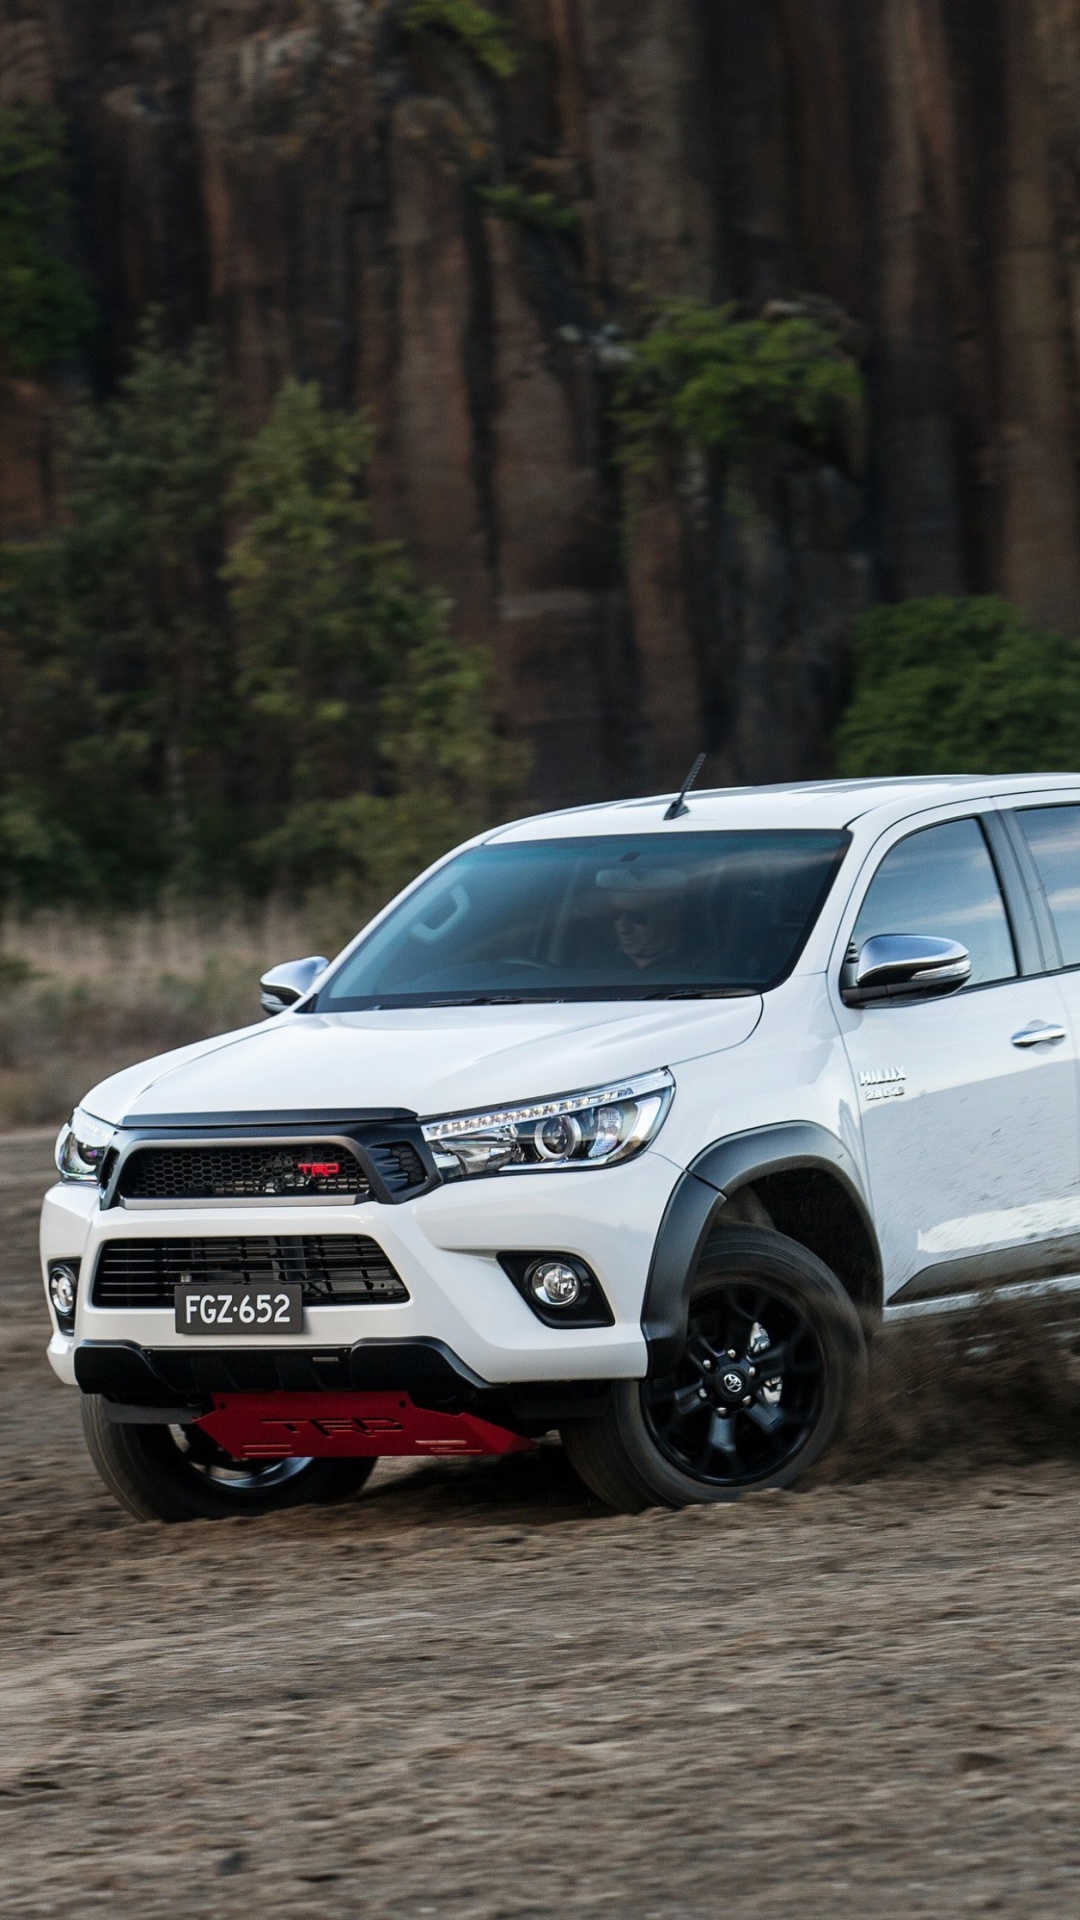 Toyota HiLux TRD Wallpaper for iPhone 6 Plus